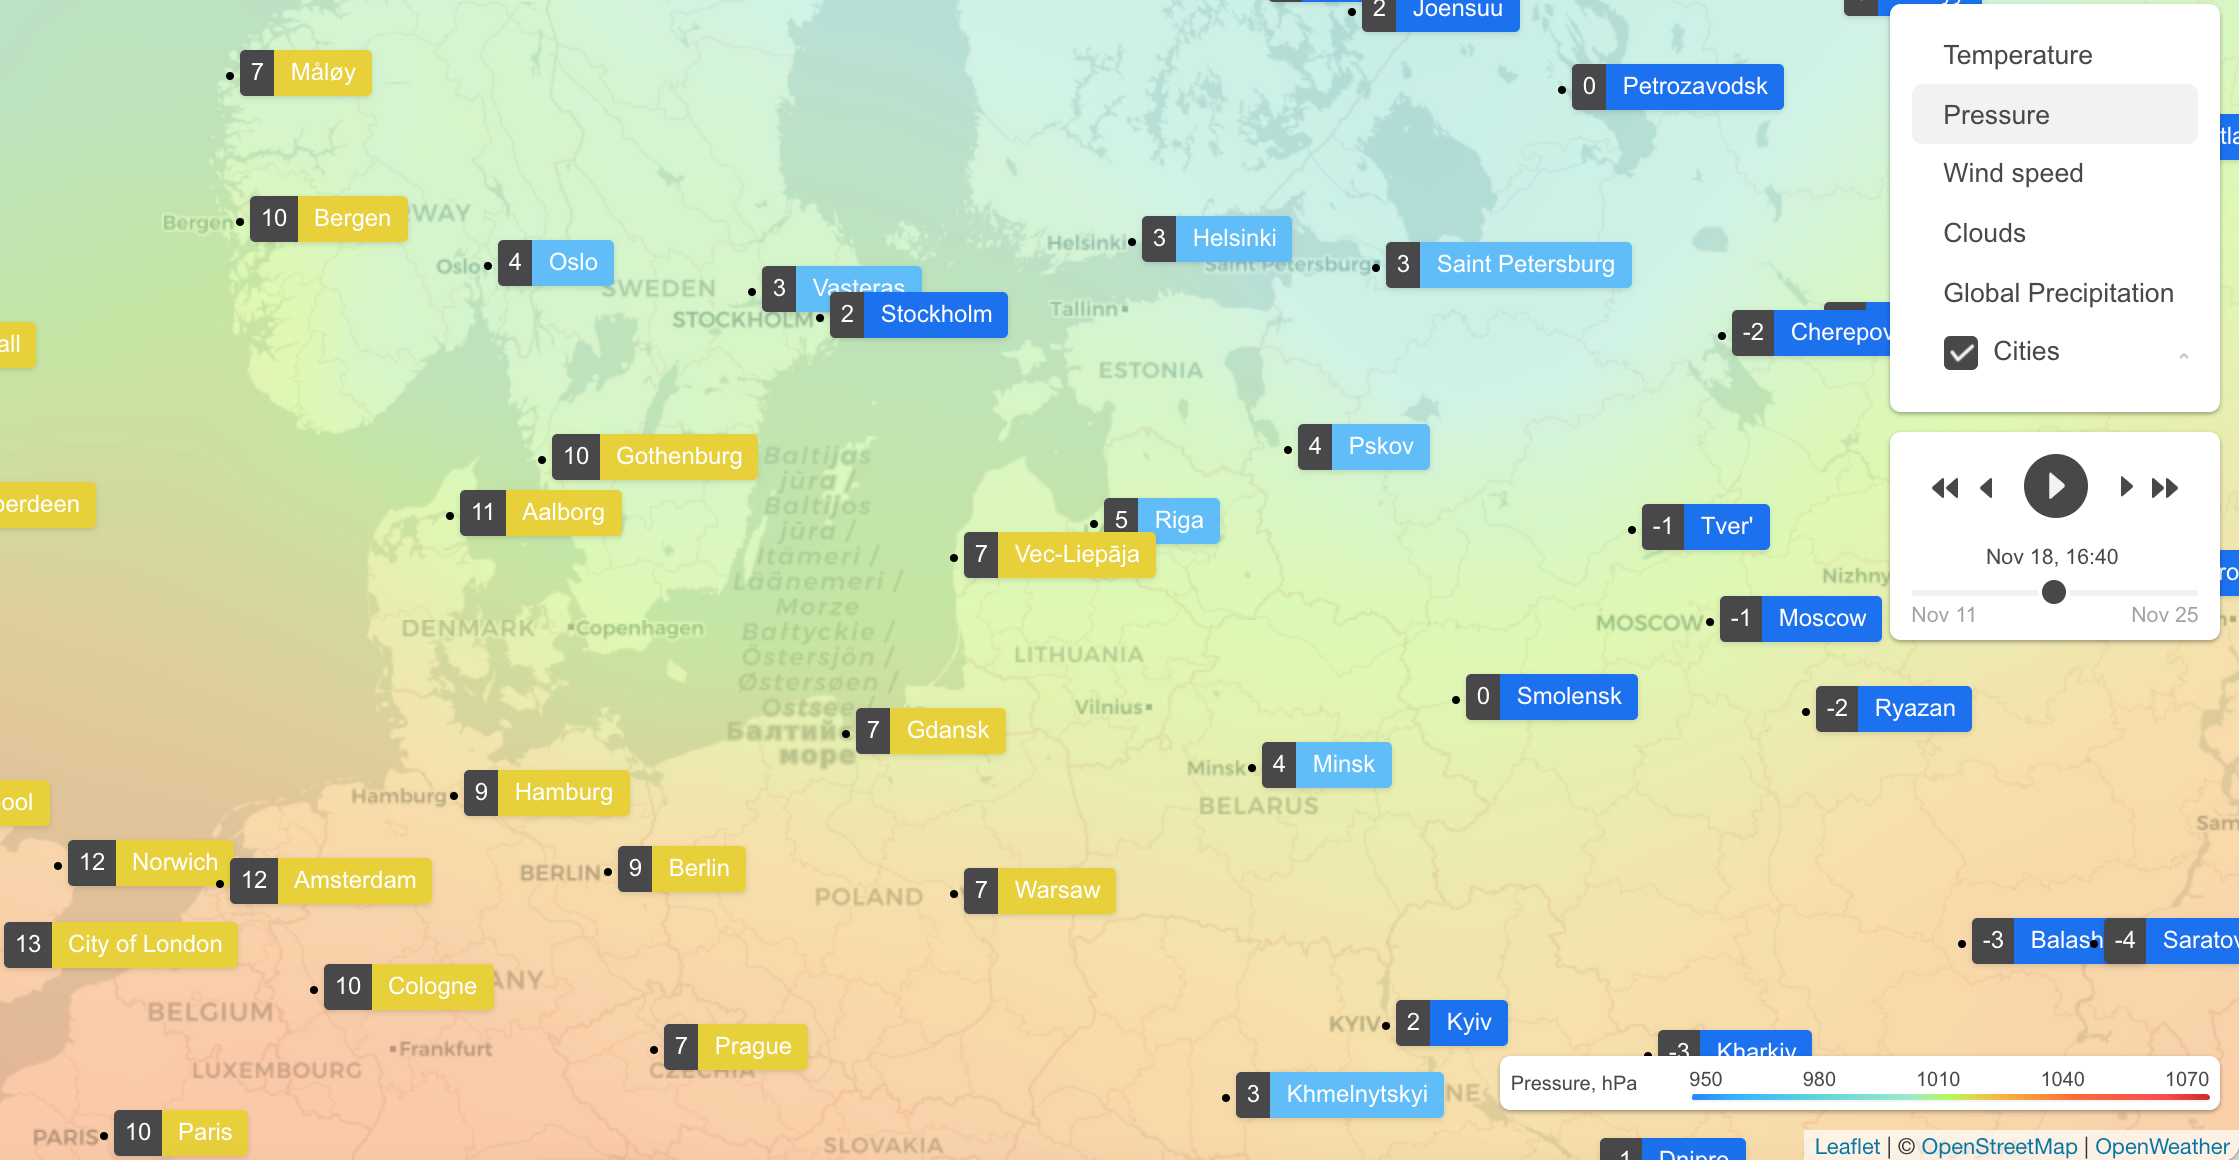 A visual and feature-rich API that gives you weather map tiles for any global location